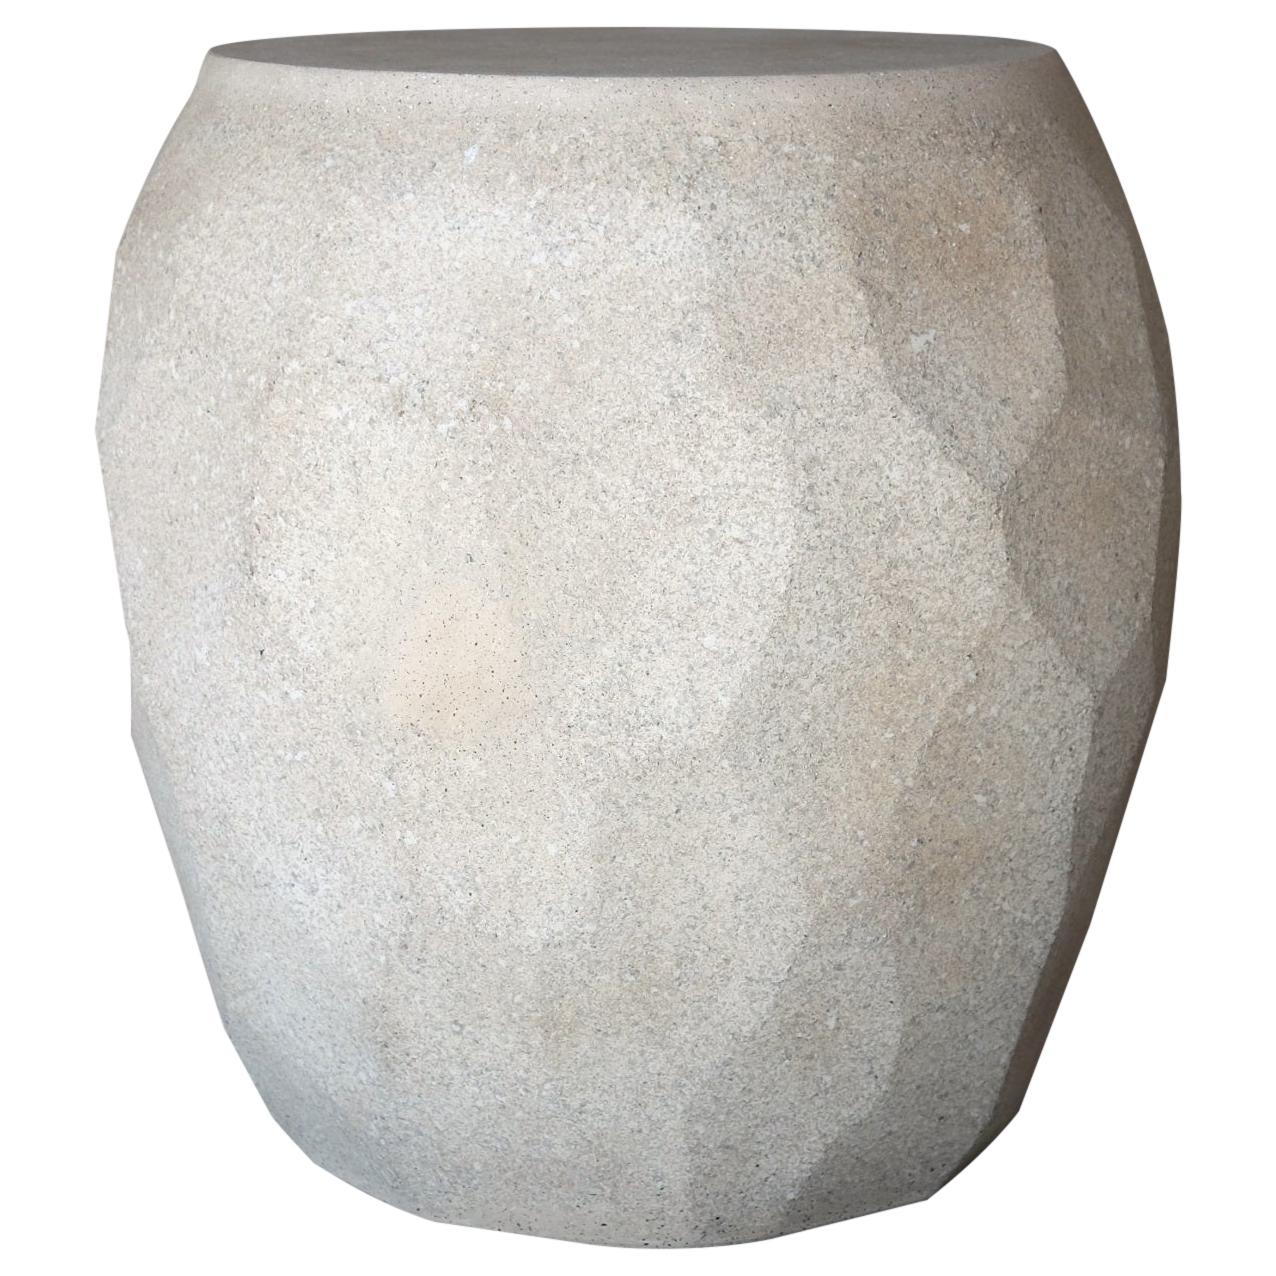 Cast Resin 'Facet' Side Table, Aged Stone Finish by Zachary A. Design